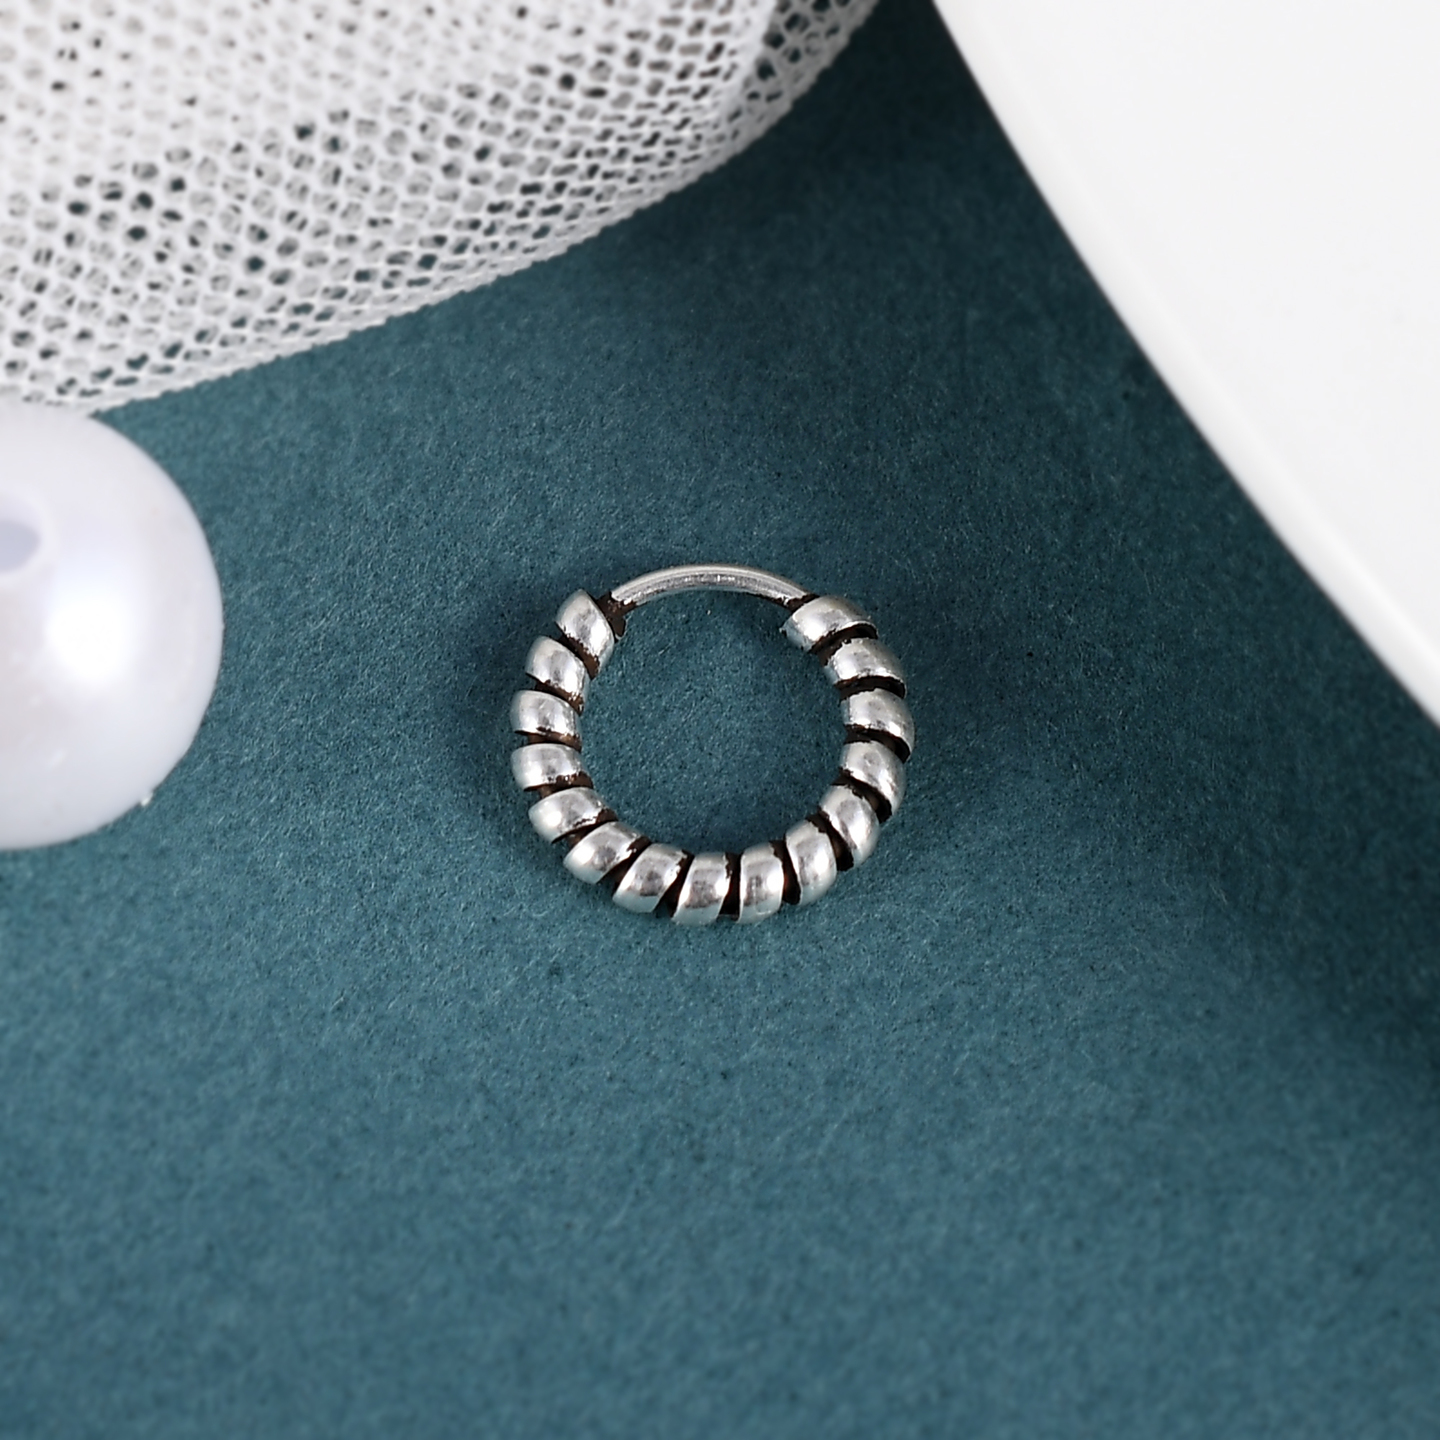 925 Silver Nose Ring or Helix Earring (1 pc)